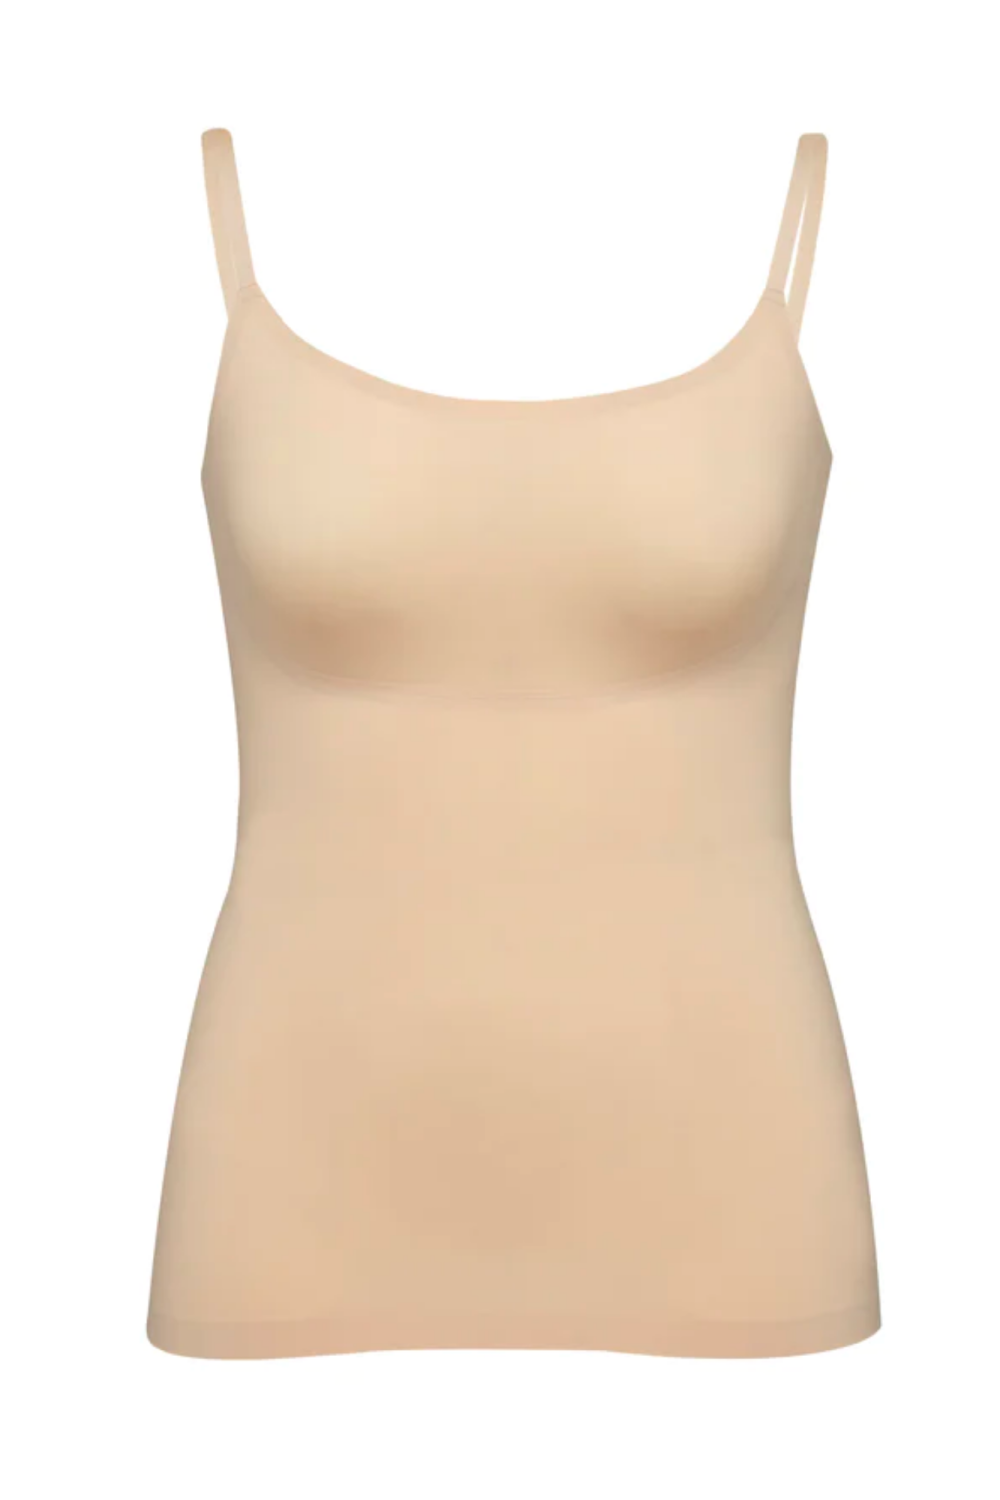 Spanx Thinstincts® Convertible Cami